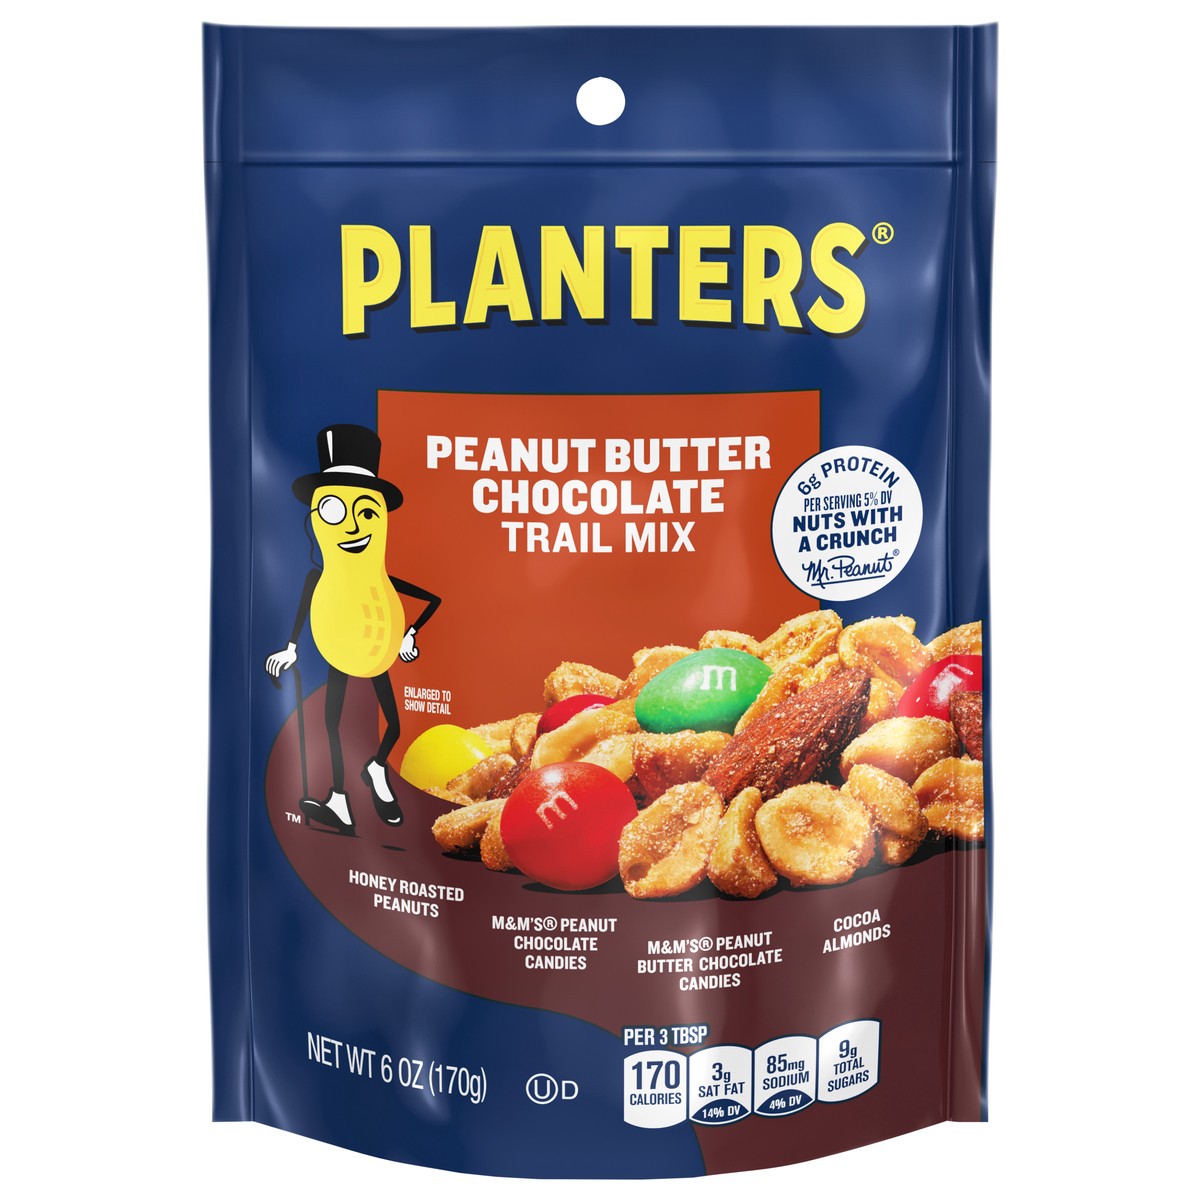 slide 1 of 7, Planters Peanut Butter Chocolate Trail Mix with Honey Peanuts, M&M Peanut Butter & Peanut Chocolate Candies & Cocoa Almonds, 6 oz Bag, 6 oz